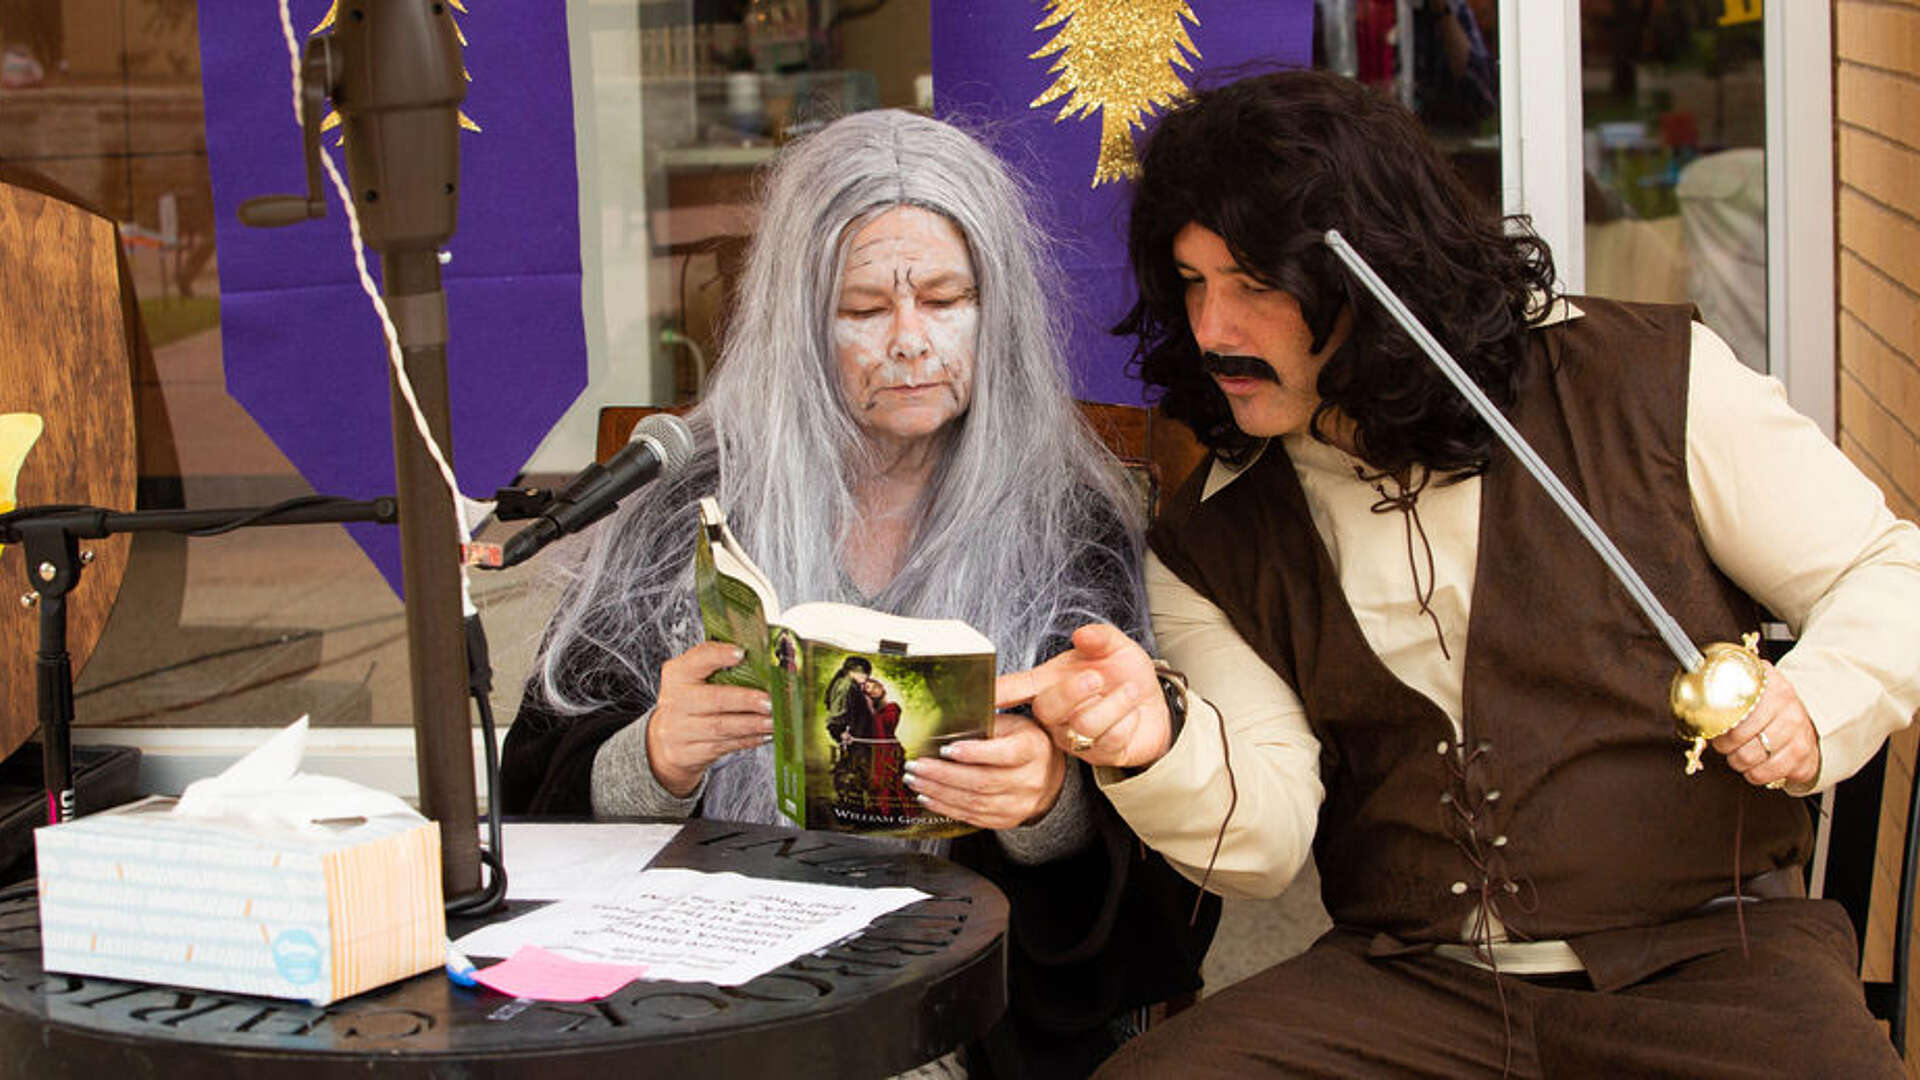 Dr. Carole Carroll and Dean of Students, Josh Stephens, in costume reading "The Princess Bride" 